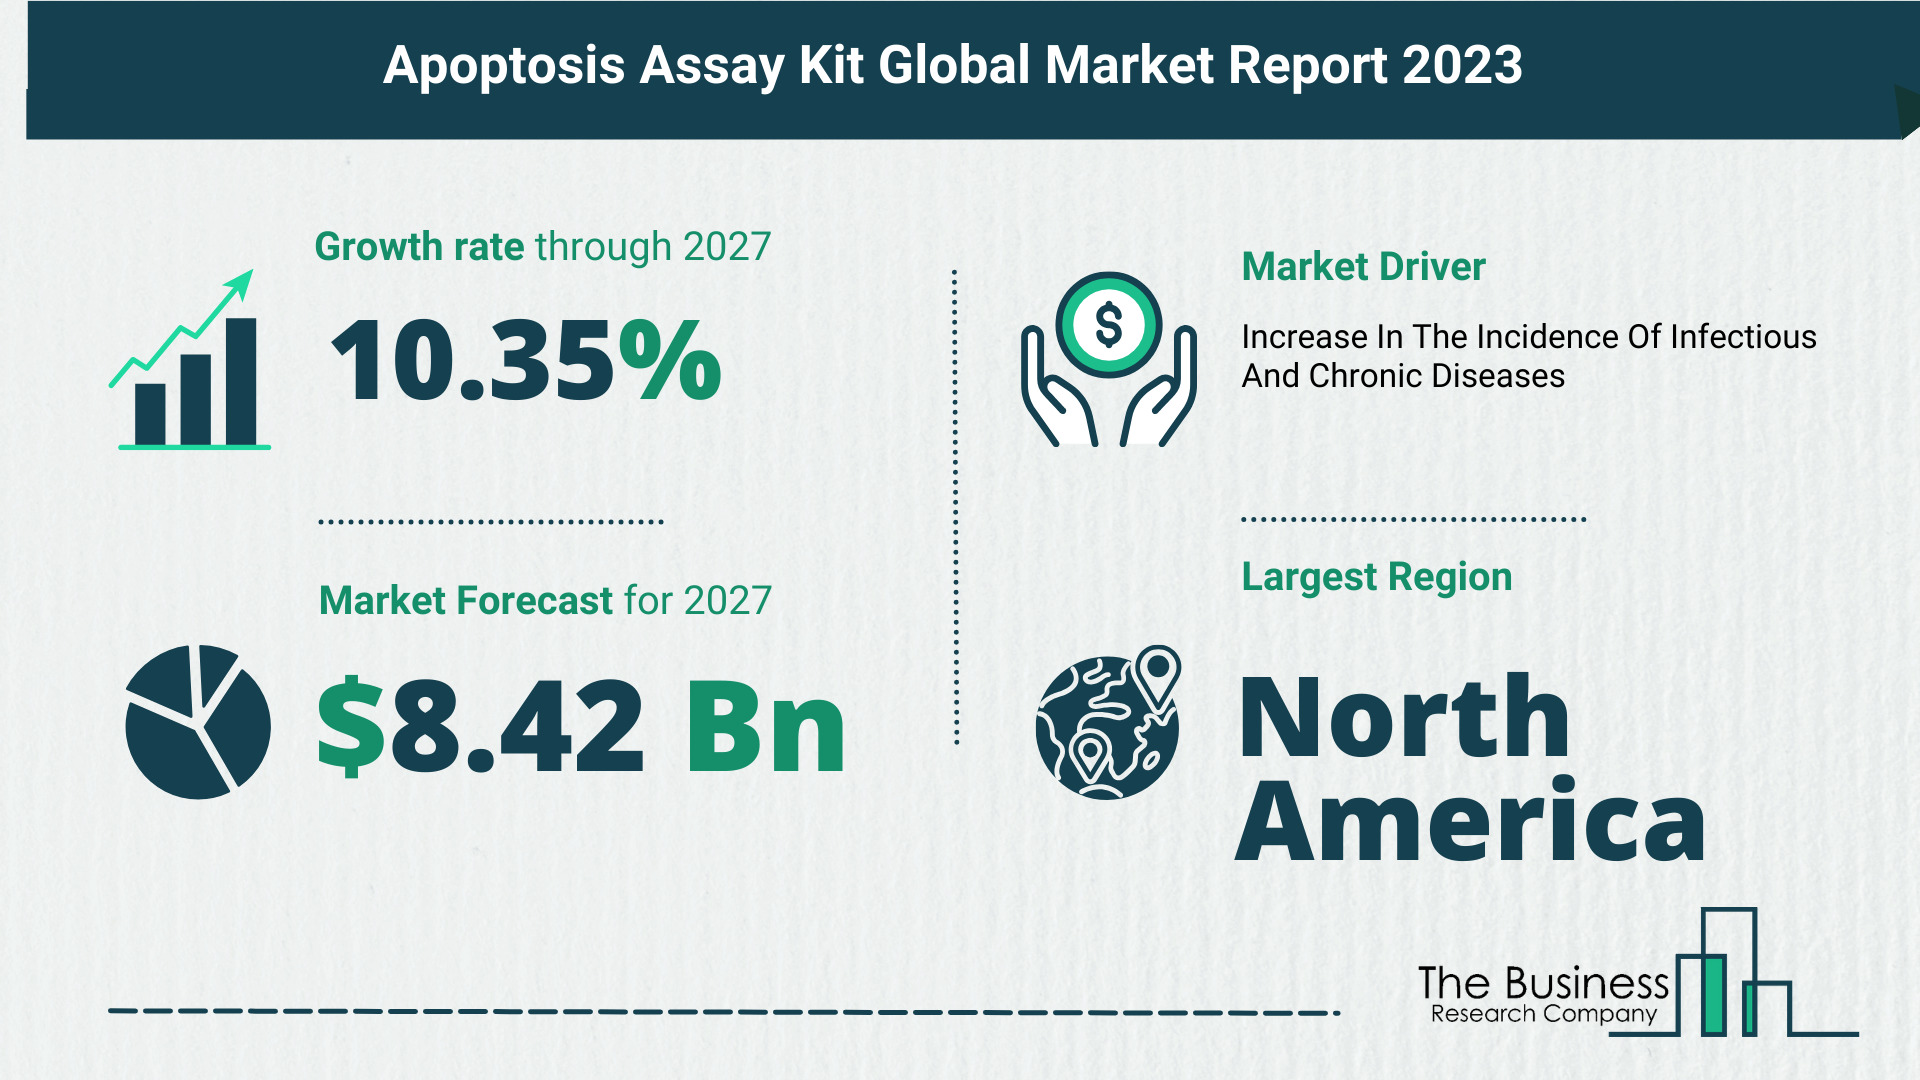 Global Apoptosis Assay Kit Market Analysis: Estimated Market Size And Growth Rate